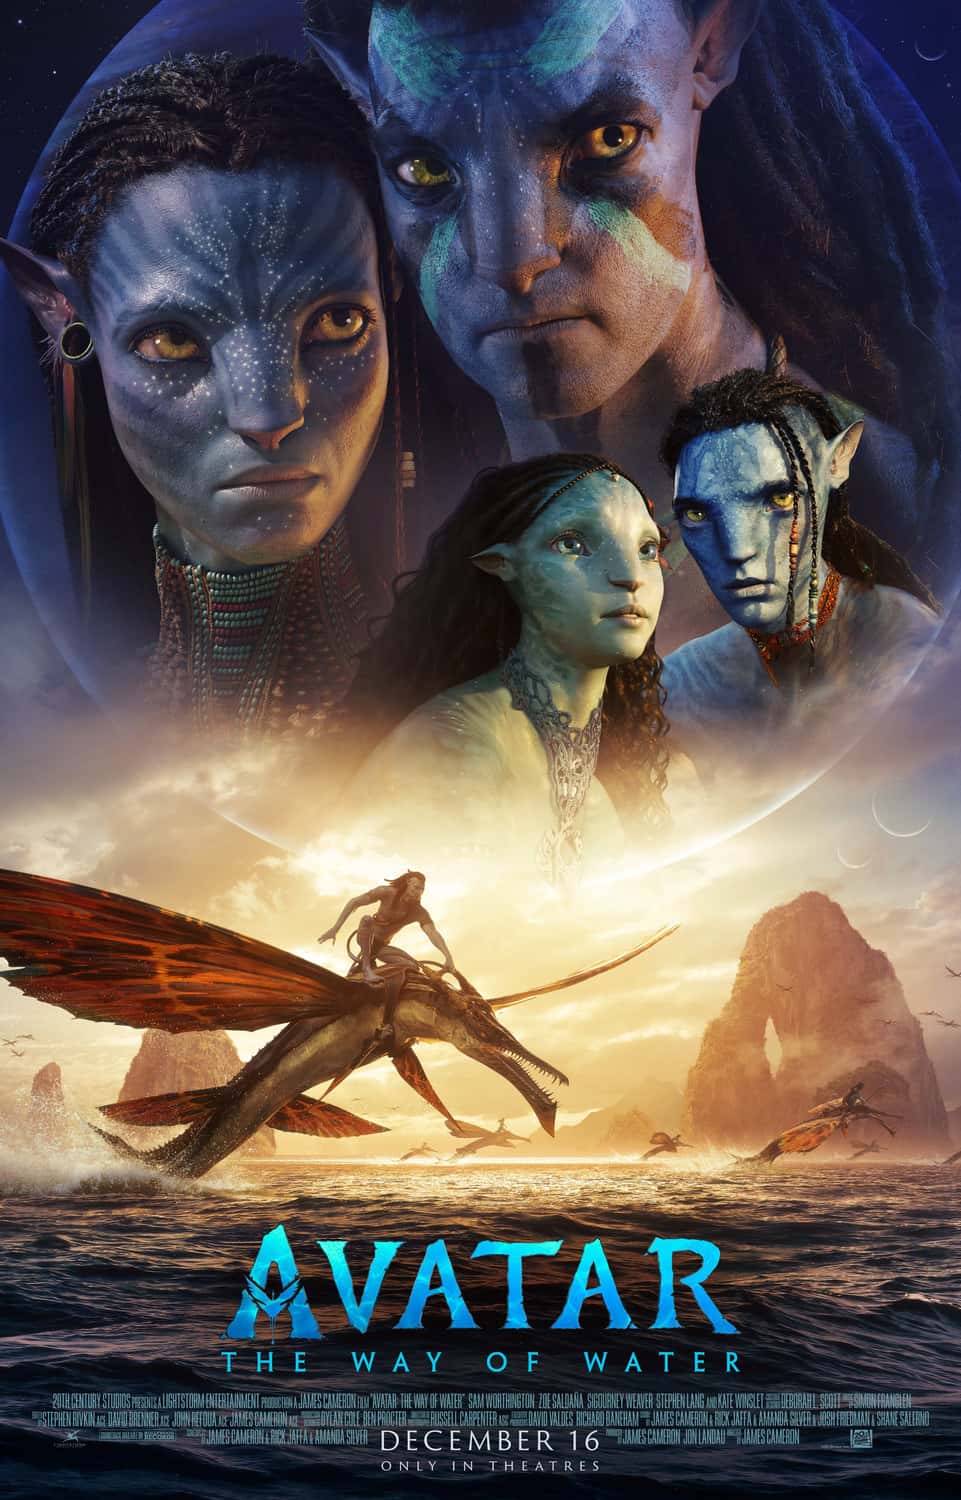 Avatar: The Way of Water crosses the $1 Billion mark in less than 2 weeks of release